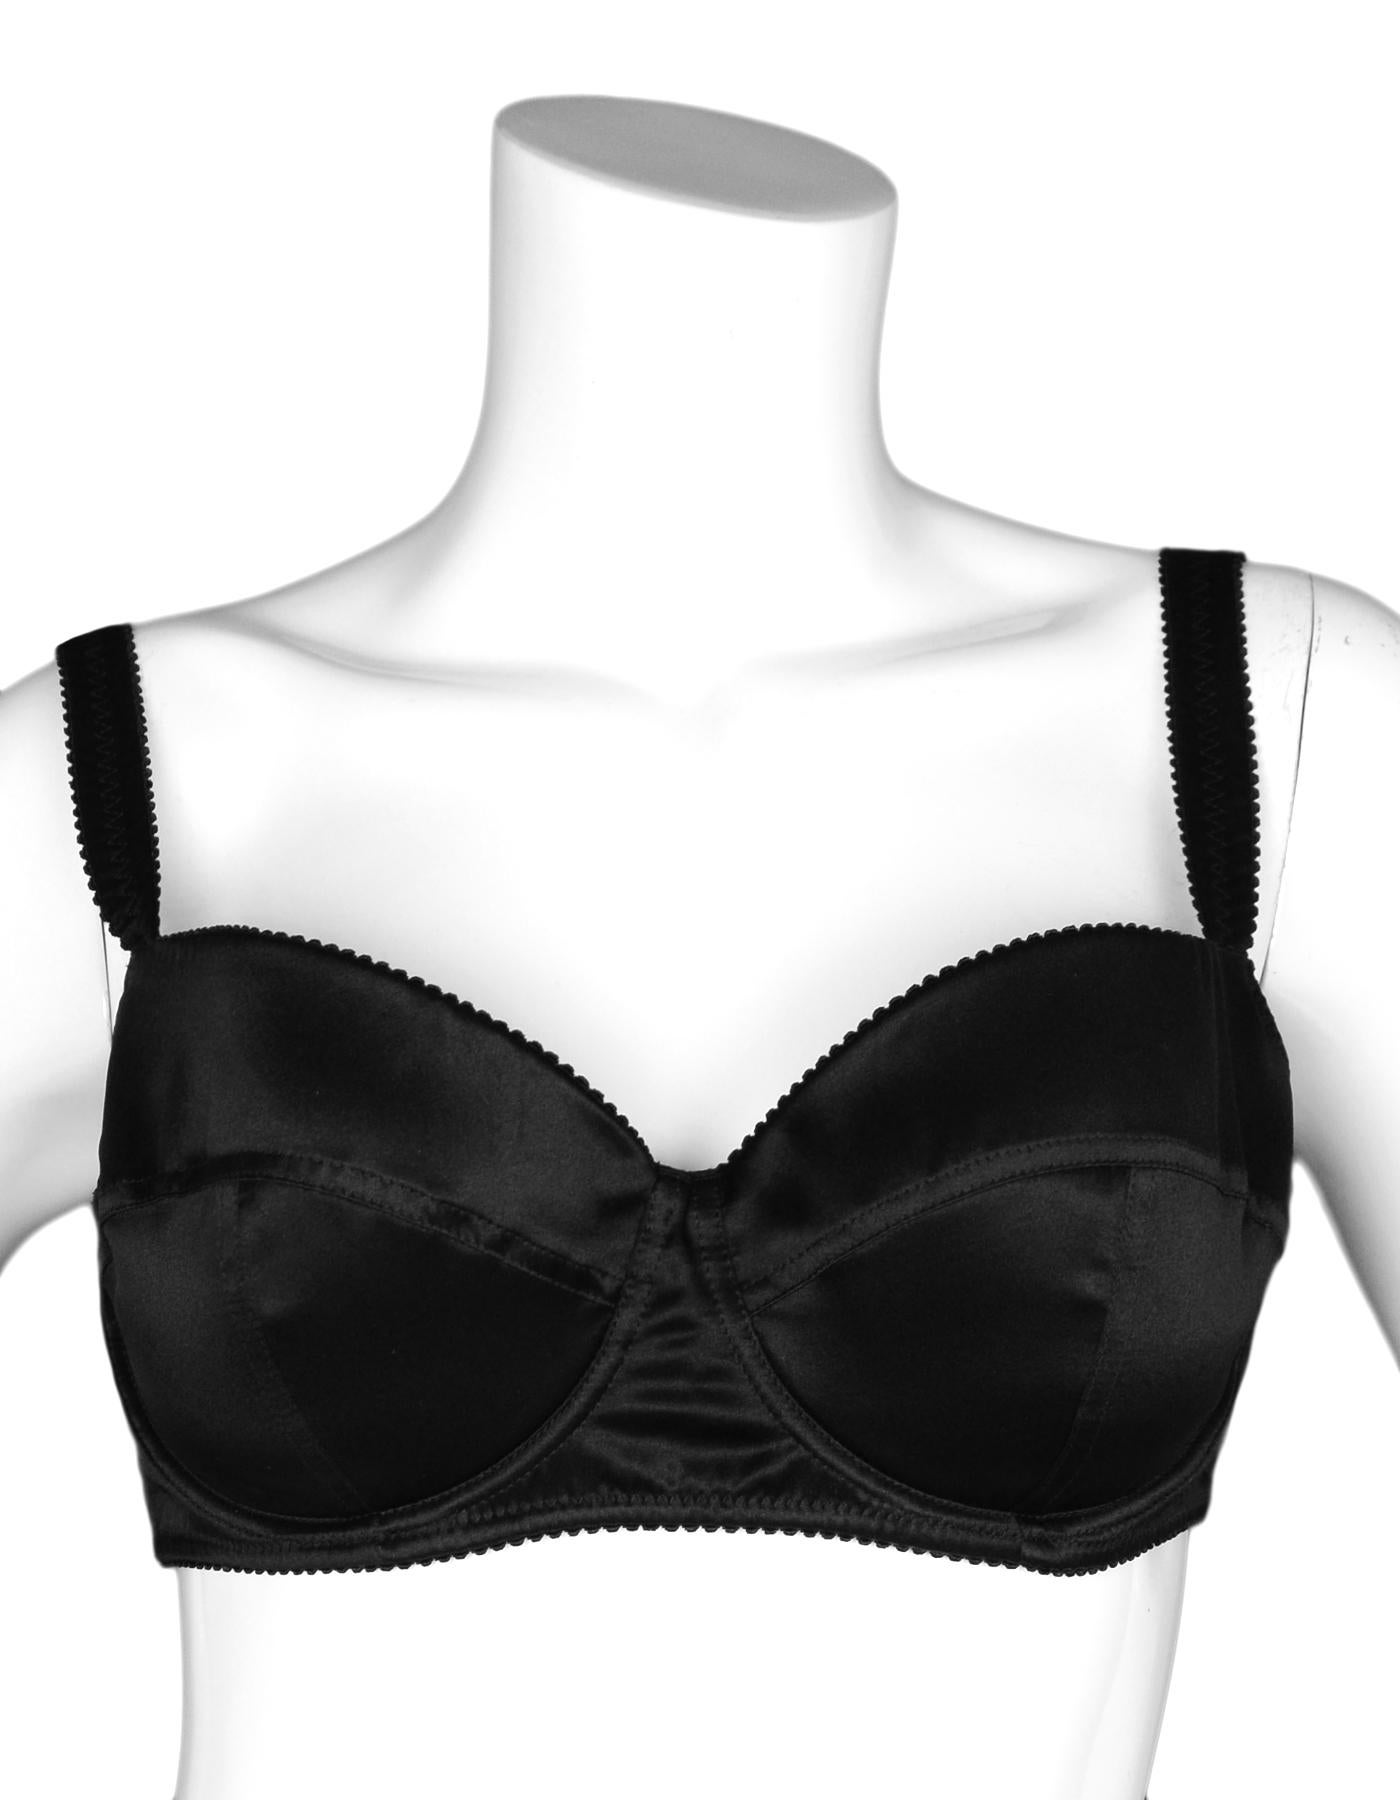 Dolce & Gabbana Black Silk/Satin Bra 40B

Made In: Italy
Color: Black
Materials:  94% silk, 6% spandex
Padding: 66% polyester, 34% polyurethane 
Opening/Closure: Three rows of two clasps 
Overall Condition: Excellent pre-owned condition